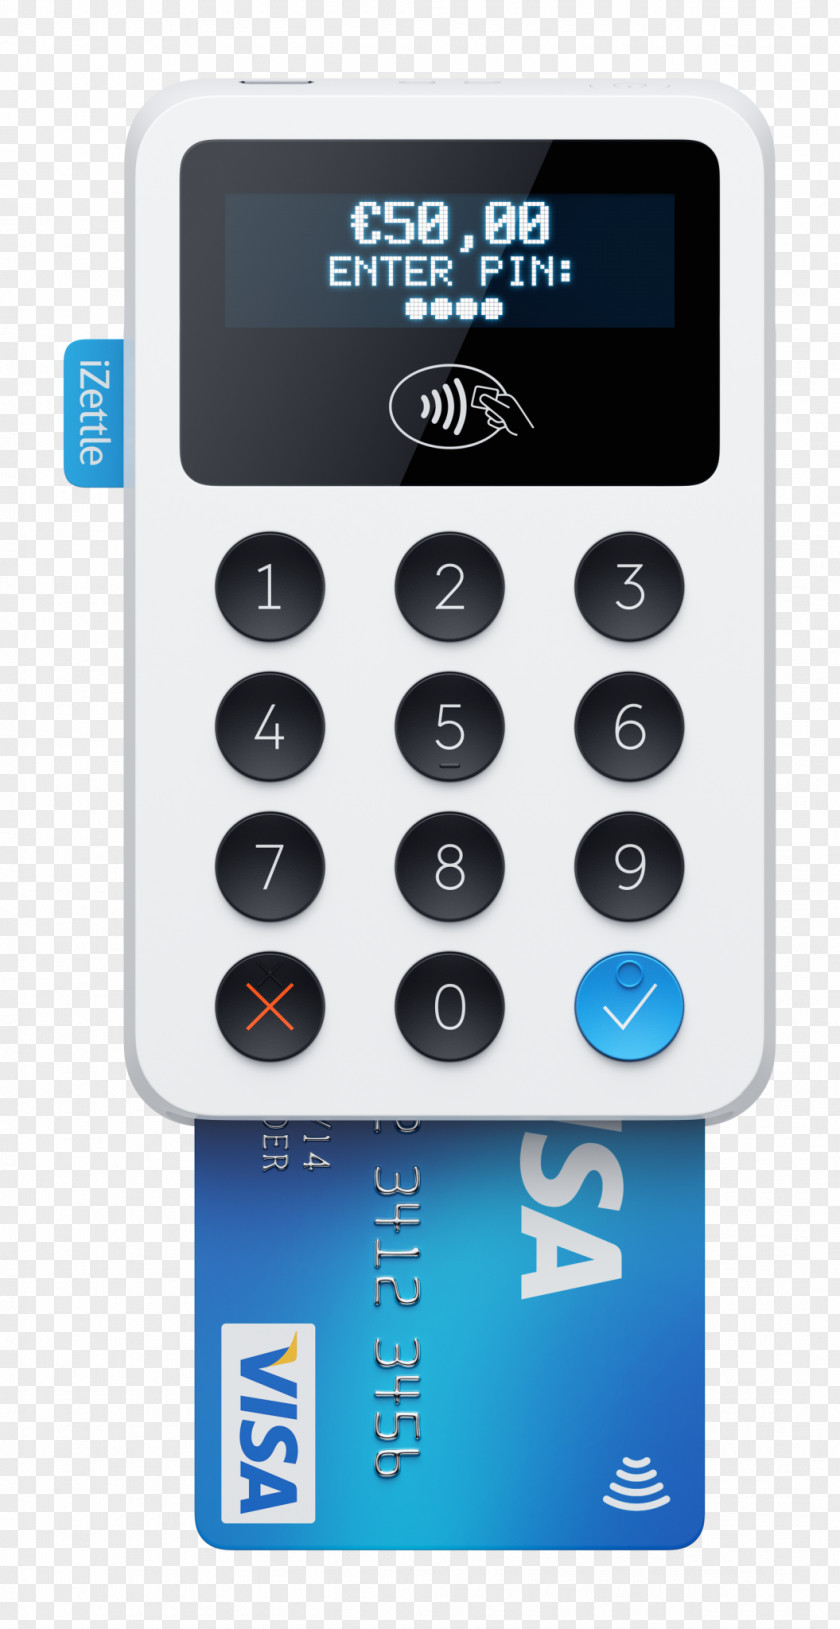 Credit Card Reader IZettle Contactless Smart Payment PNG